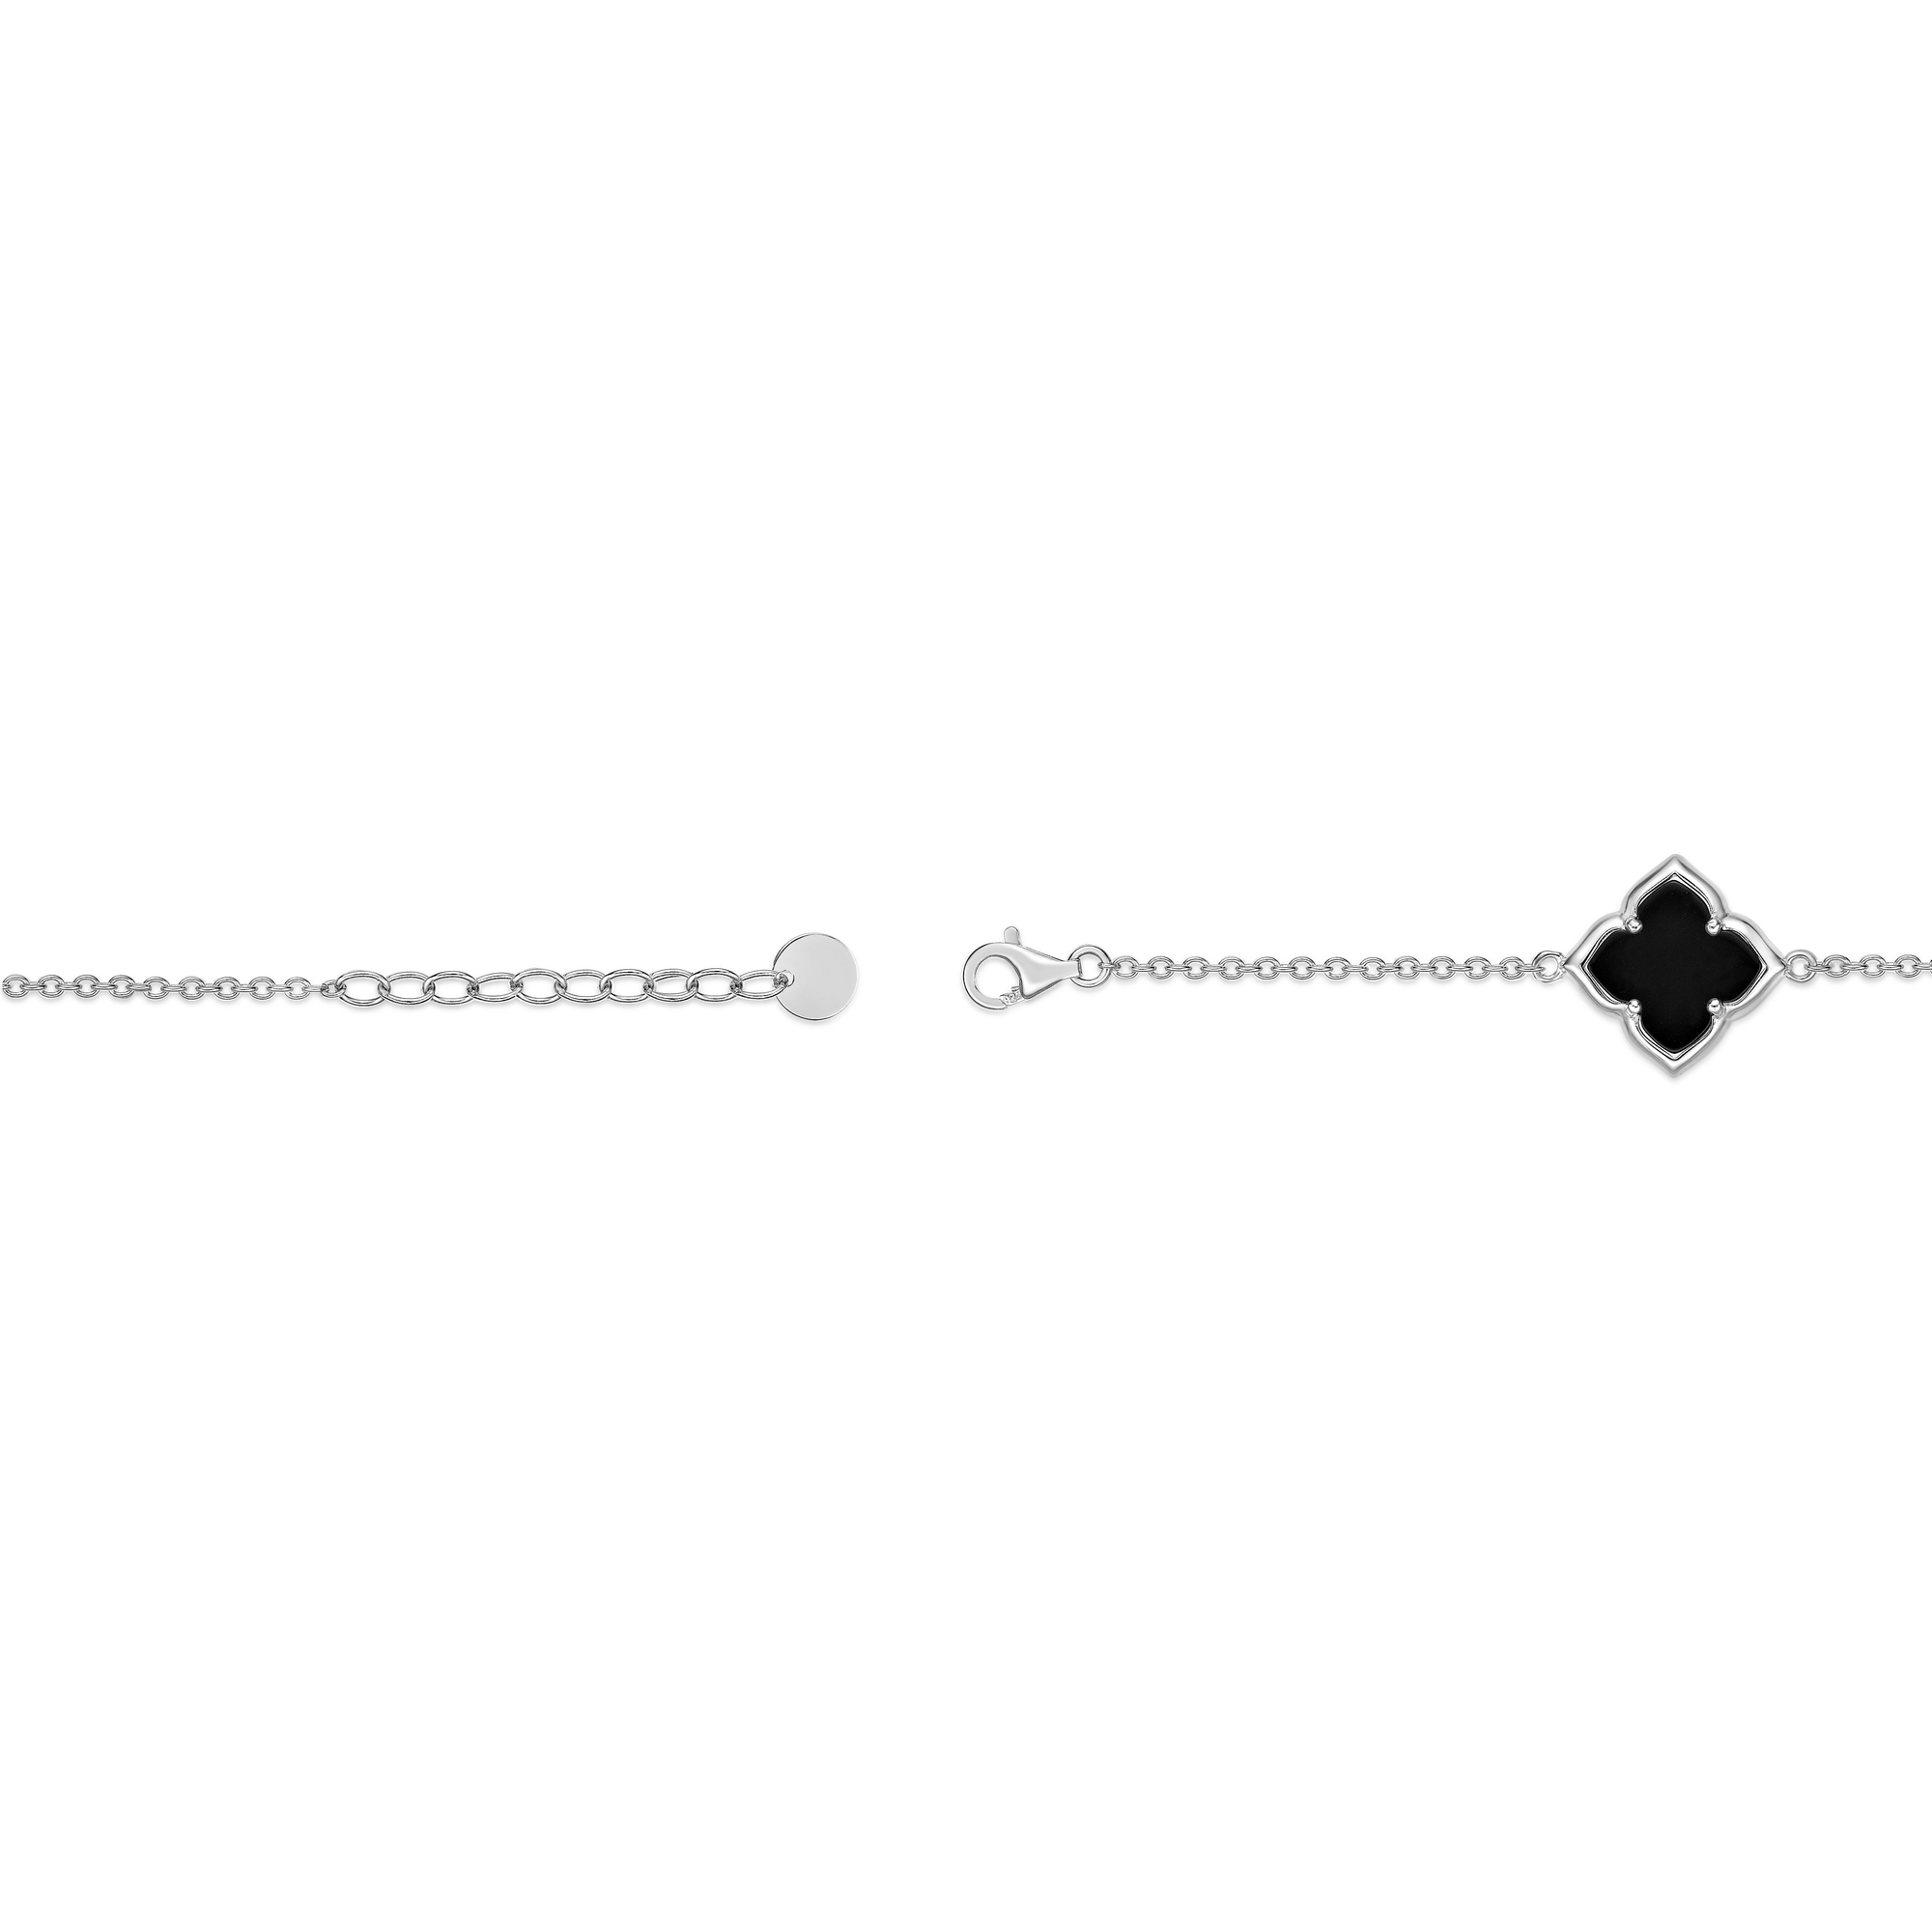 Lavari Jewelers Women’s Black Onyx 3 Clover Bracelet with Lobster Clasp, 925 Sterling Silver, 7-8 Inches - Black Onyx